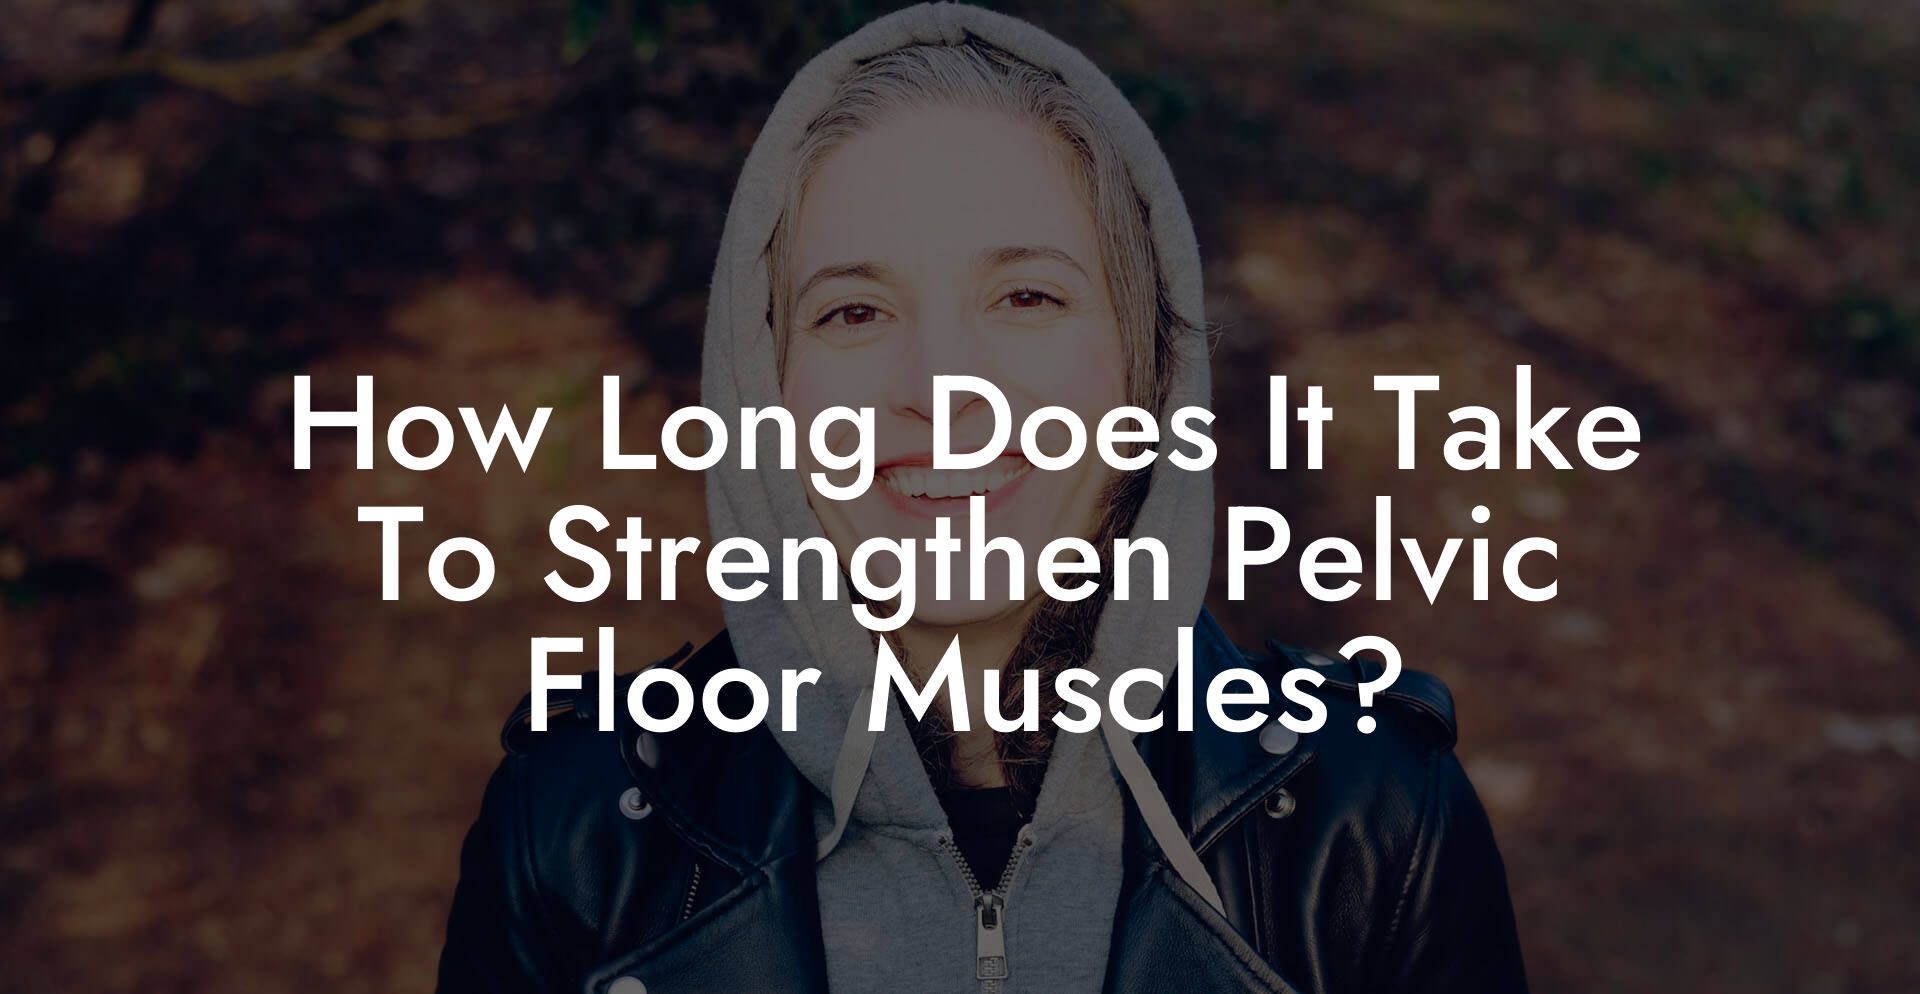 How Long Does It Take To Strengthen Pelvic Floor Muscles?